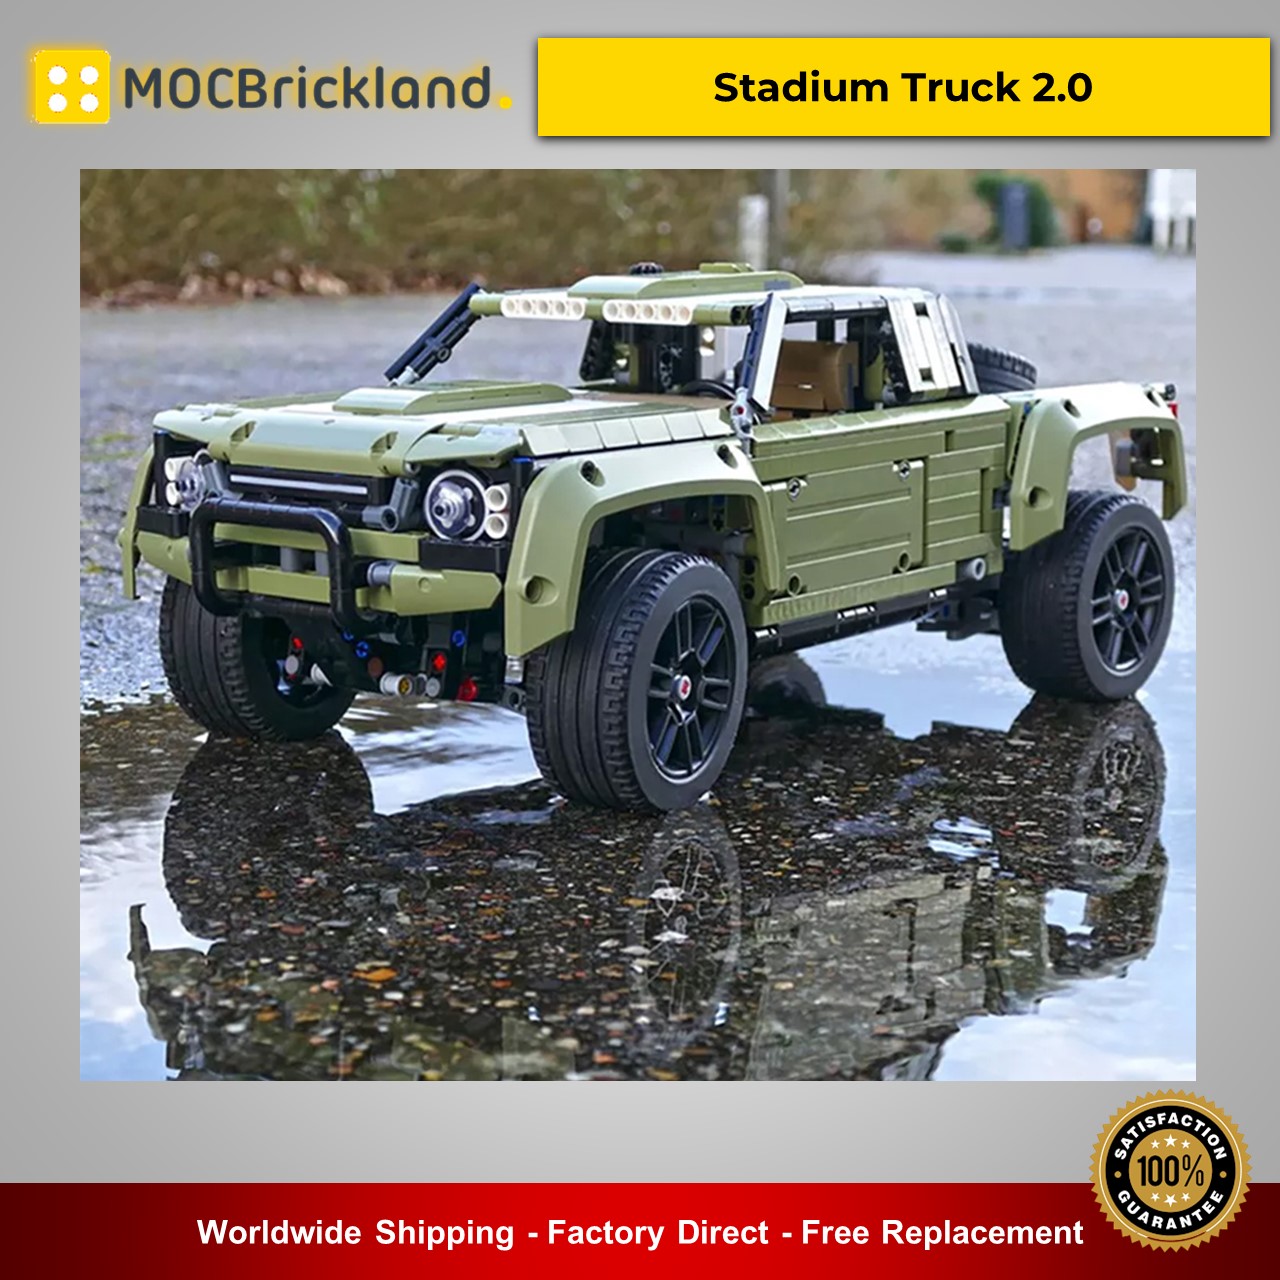 MOC-36089 Stadium Truck 2.0 Technic Designed By grohl With 2572 Pieces